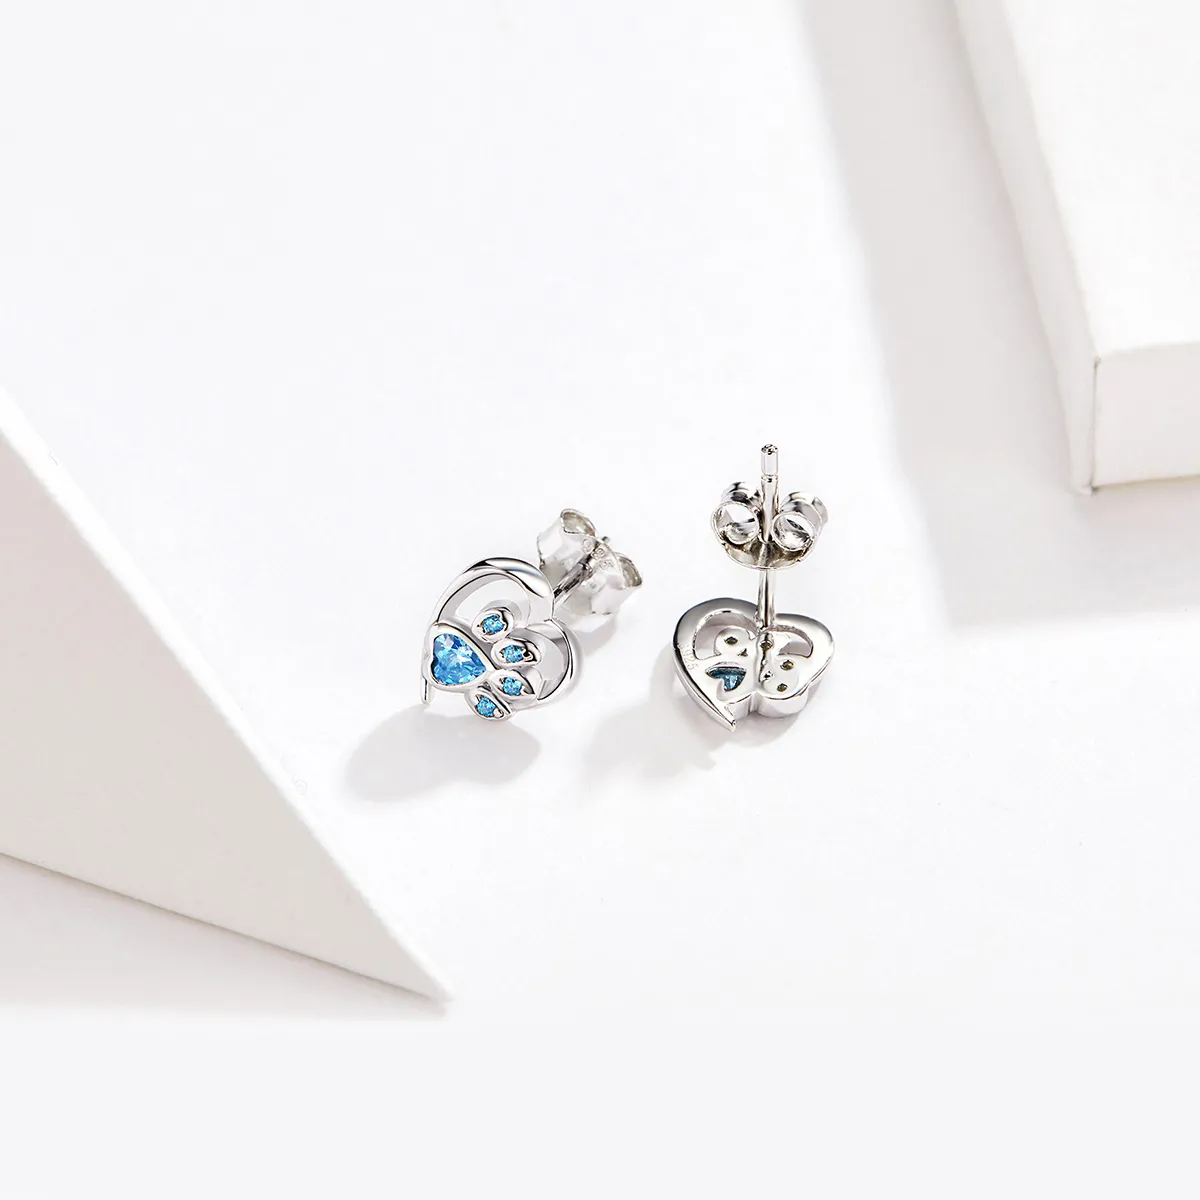 Pandora Style Silver Caring Dog Paw Heart Stud Earrings - SCE654